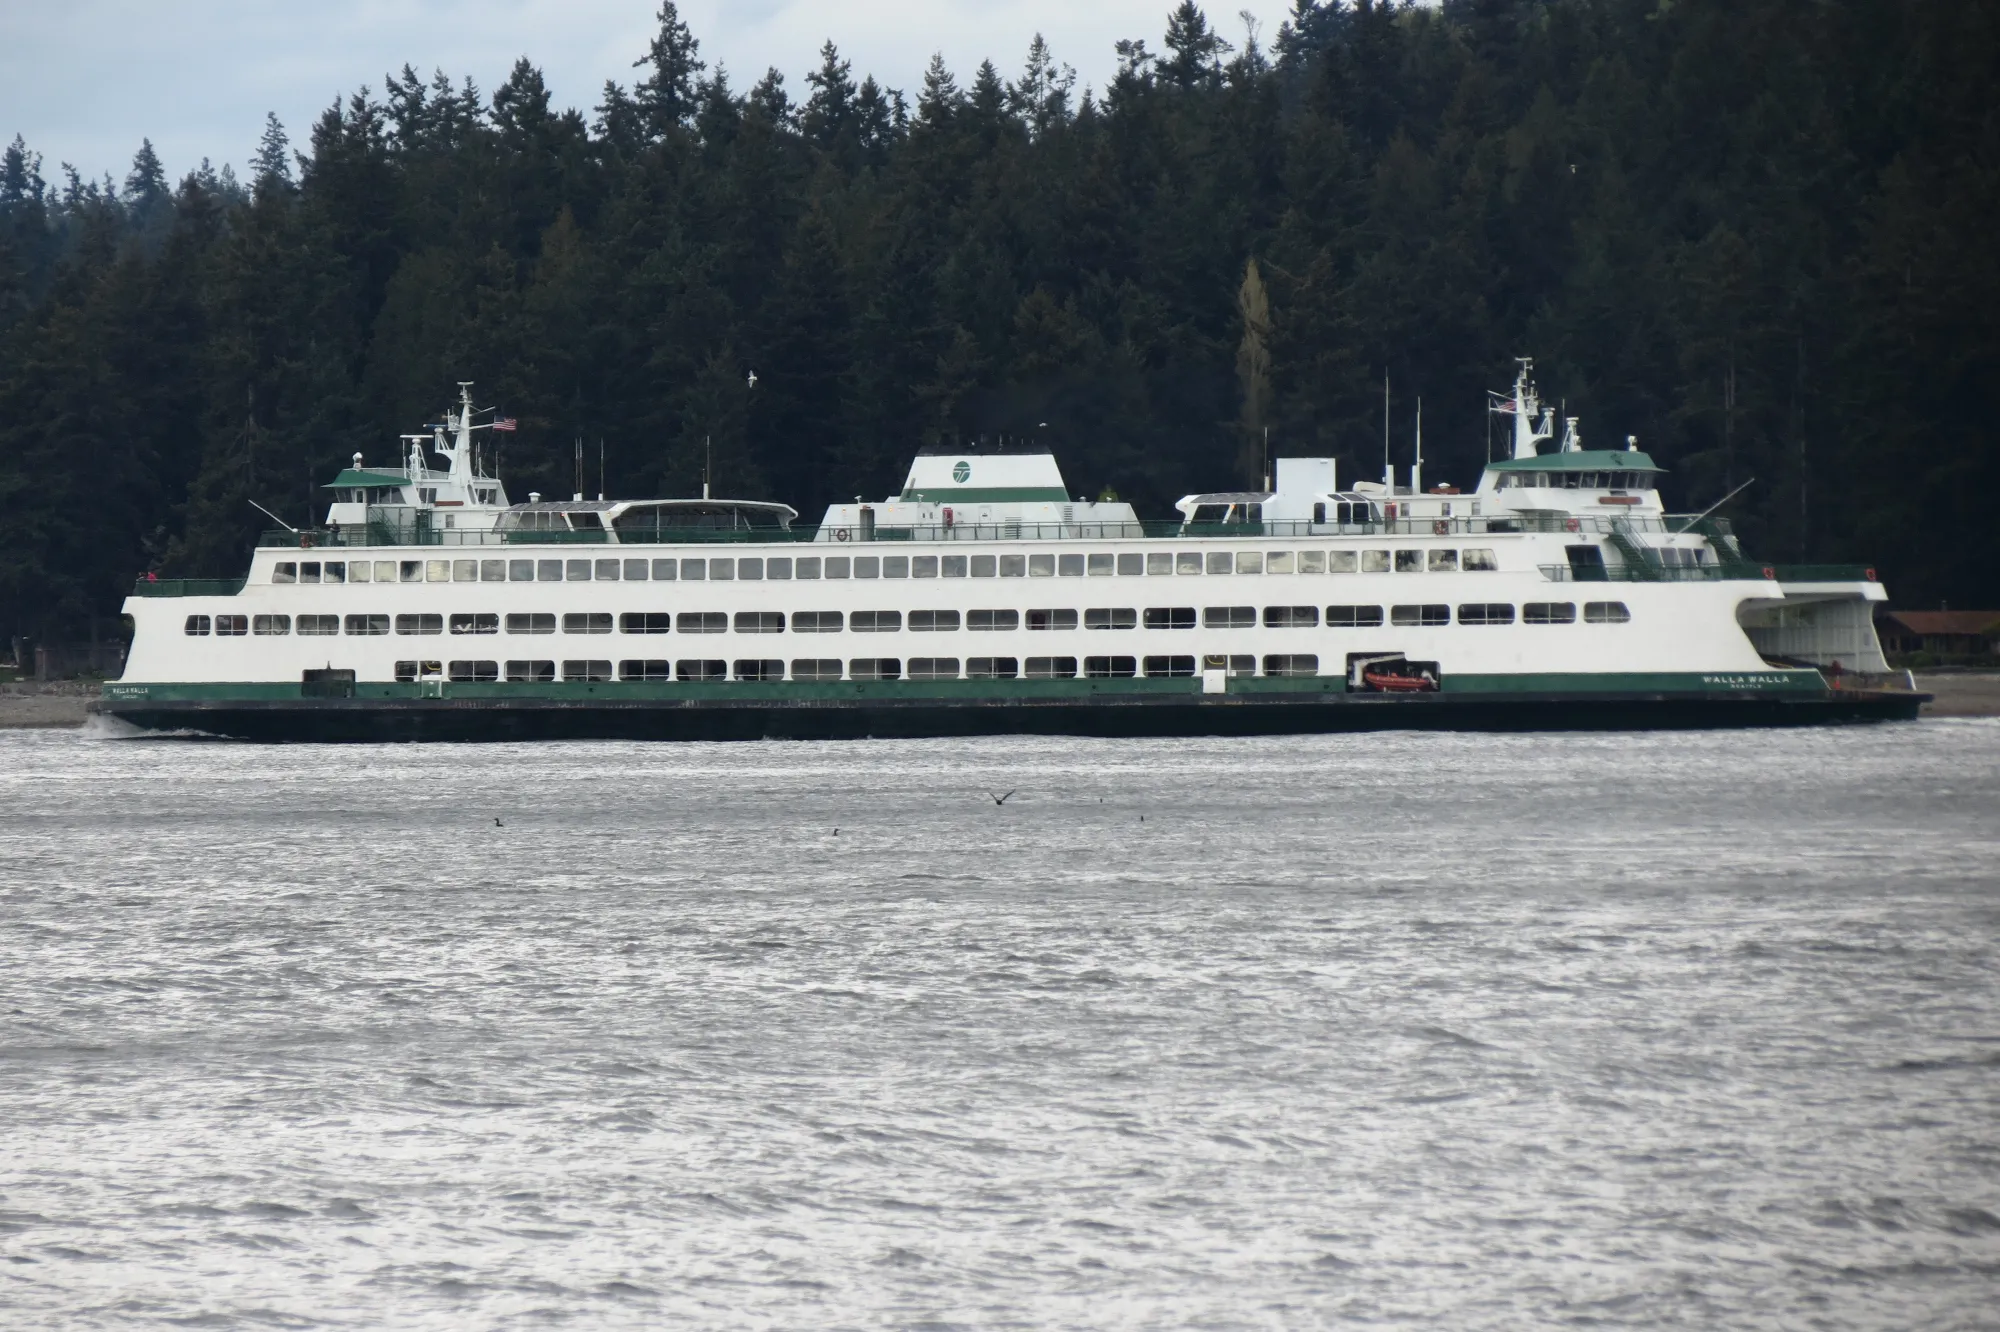 The MV Walla Walla, a green and white ferry vessel owned and operated by Washington State Ferries, sails in the Rich Passage